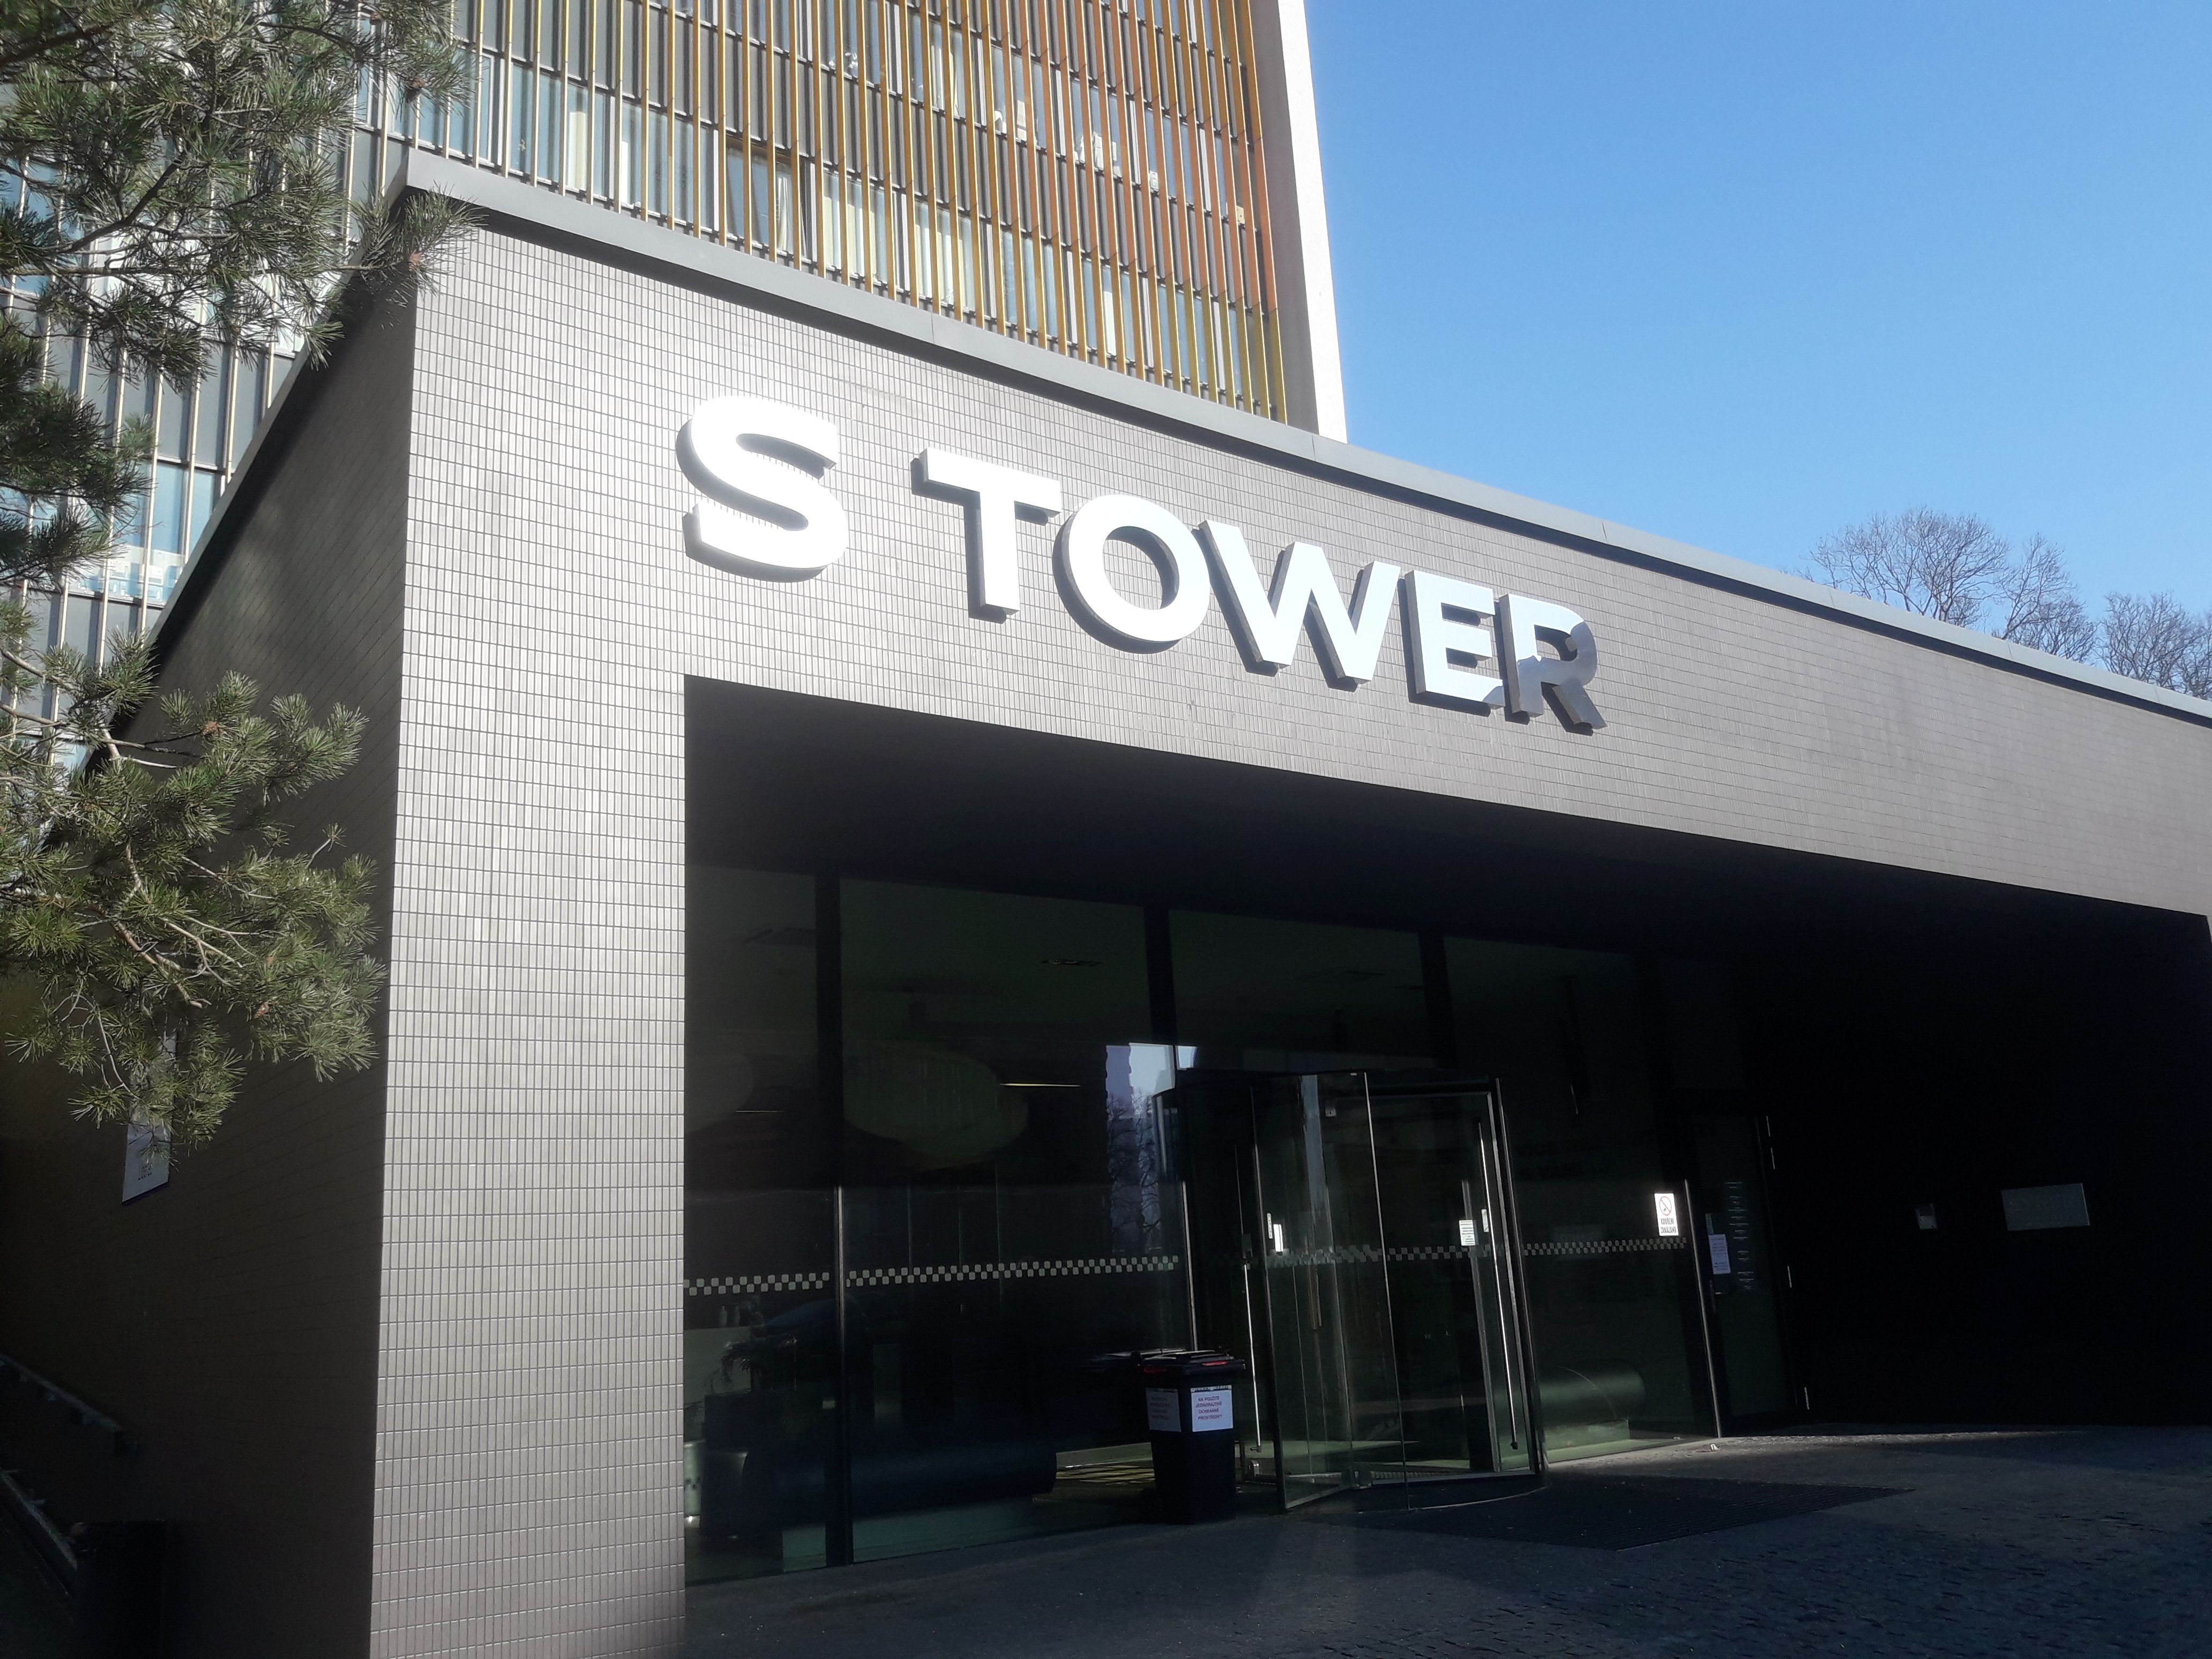 S TOWER